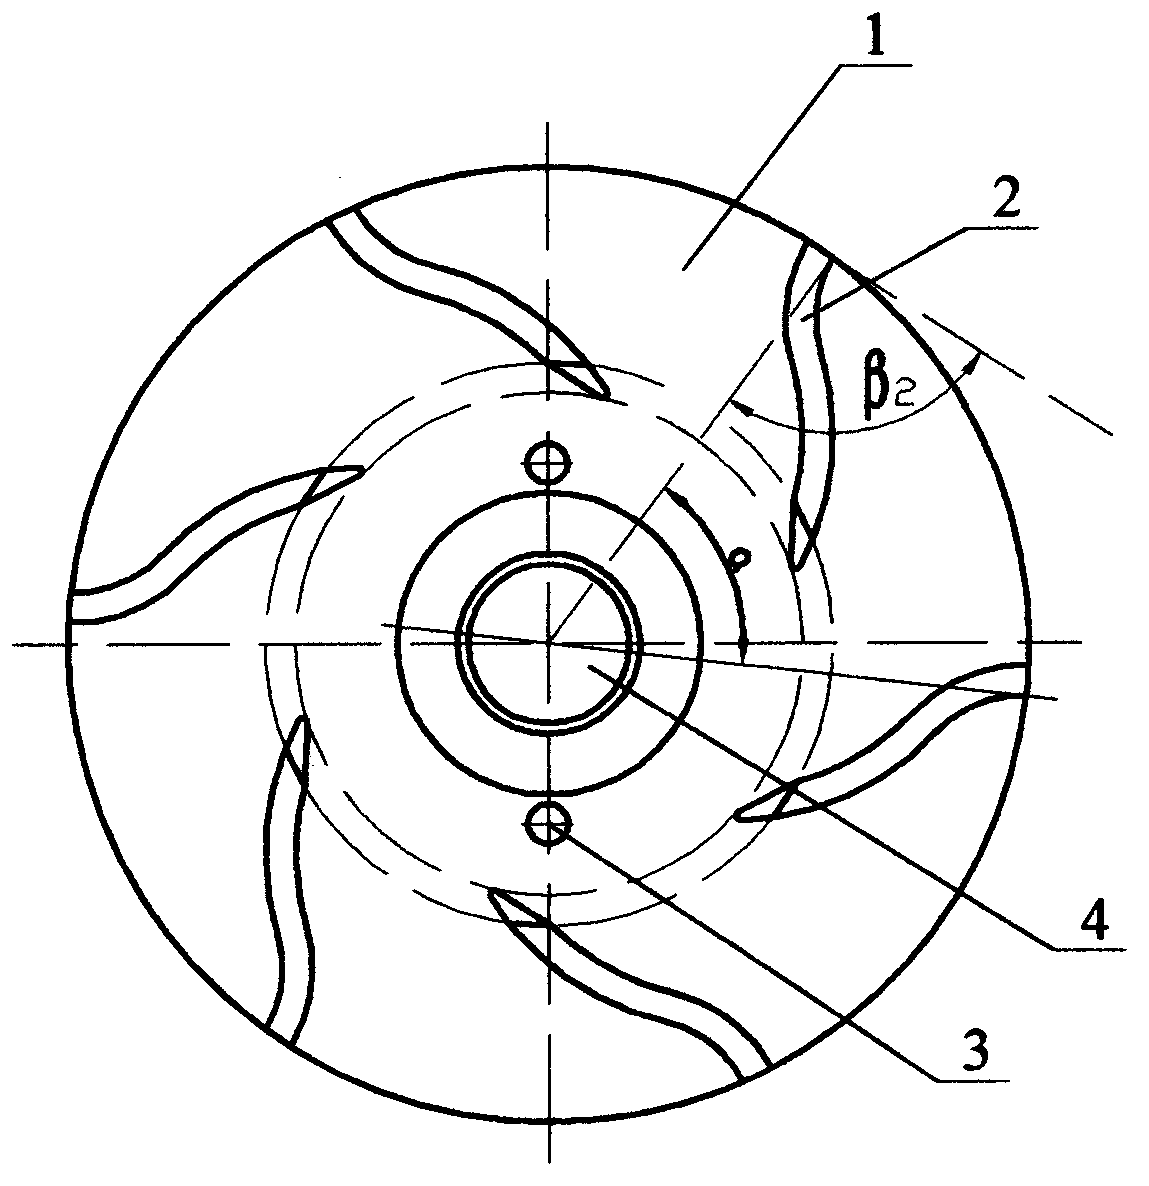 Semi-open impeller supercharge structure